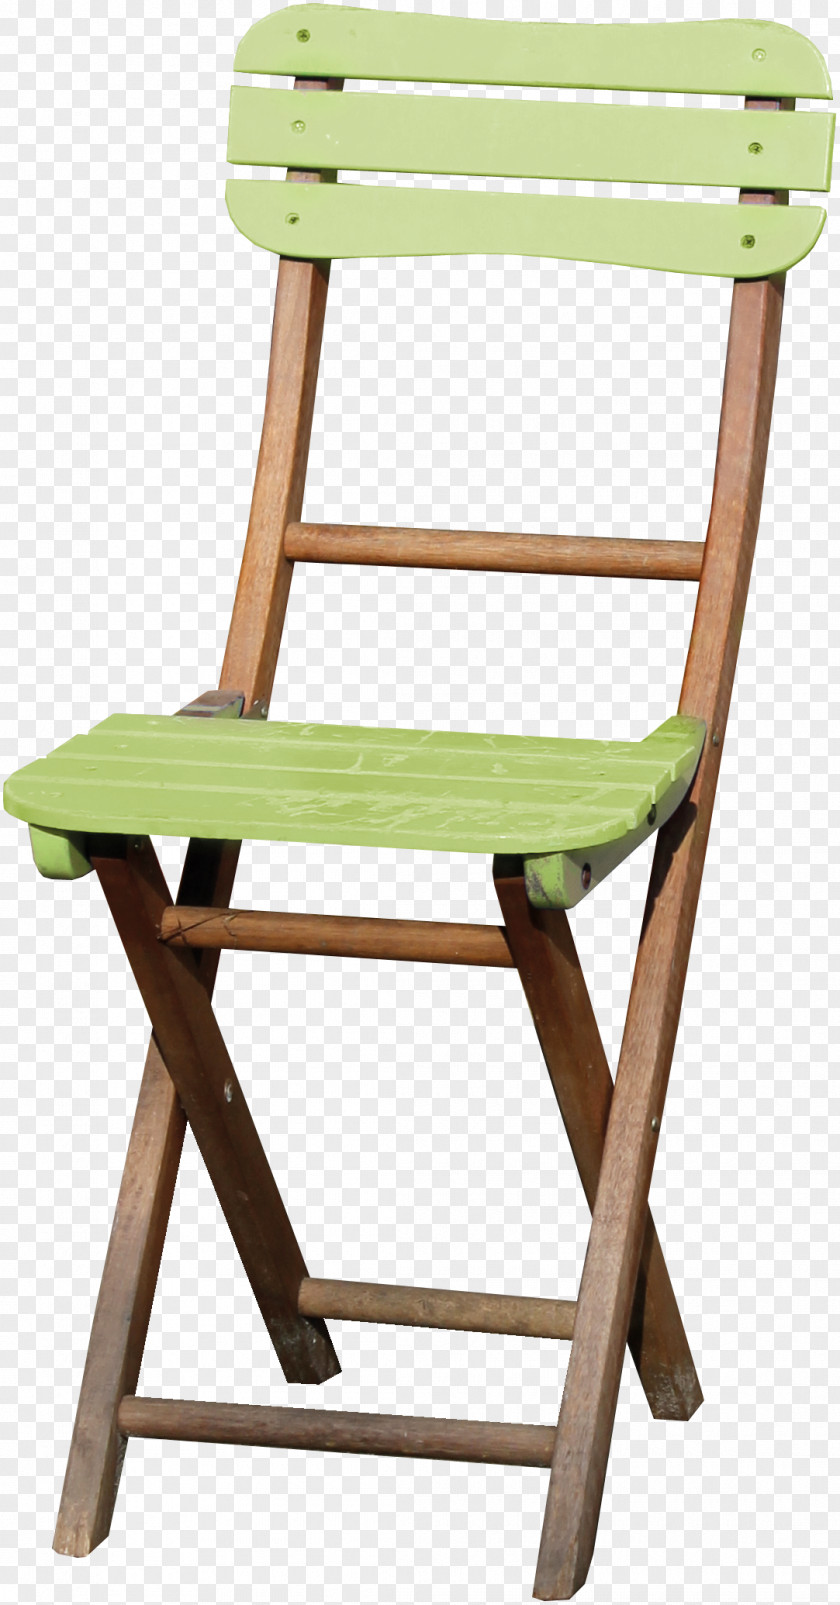 Wooden Chairs Chair Bench Stool PNG